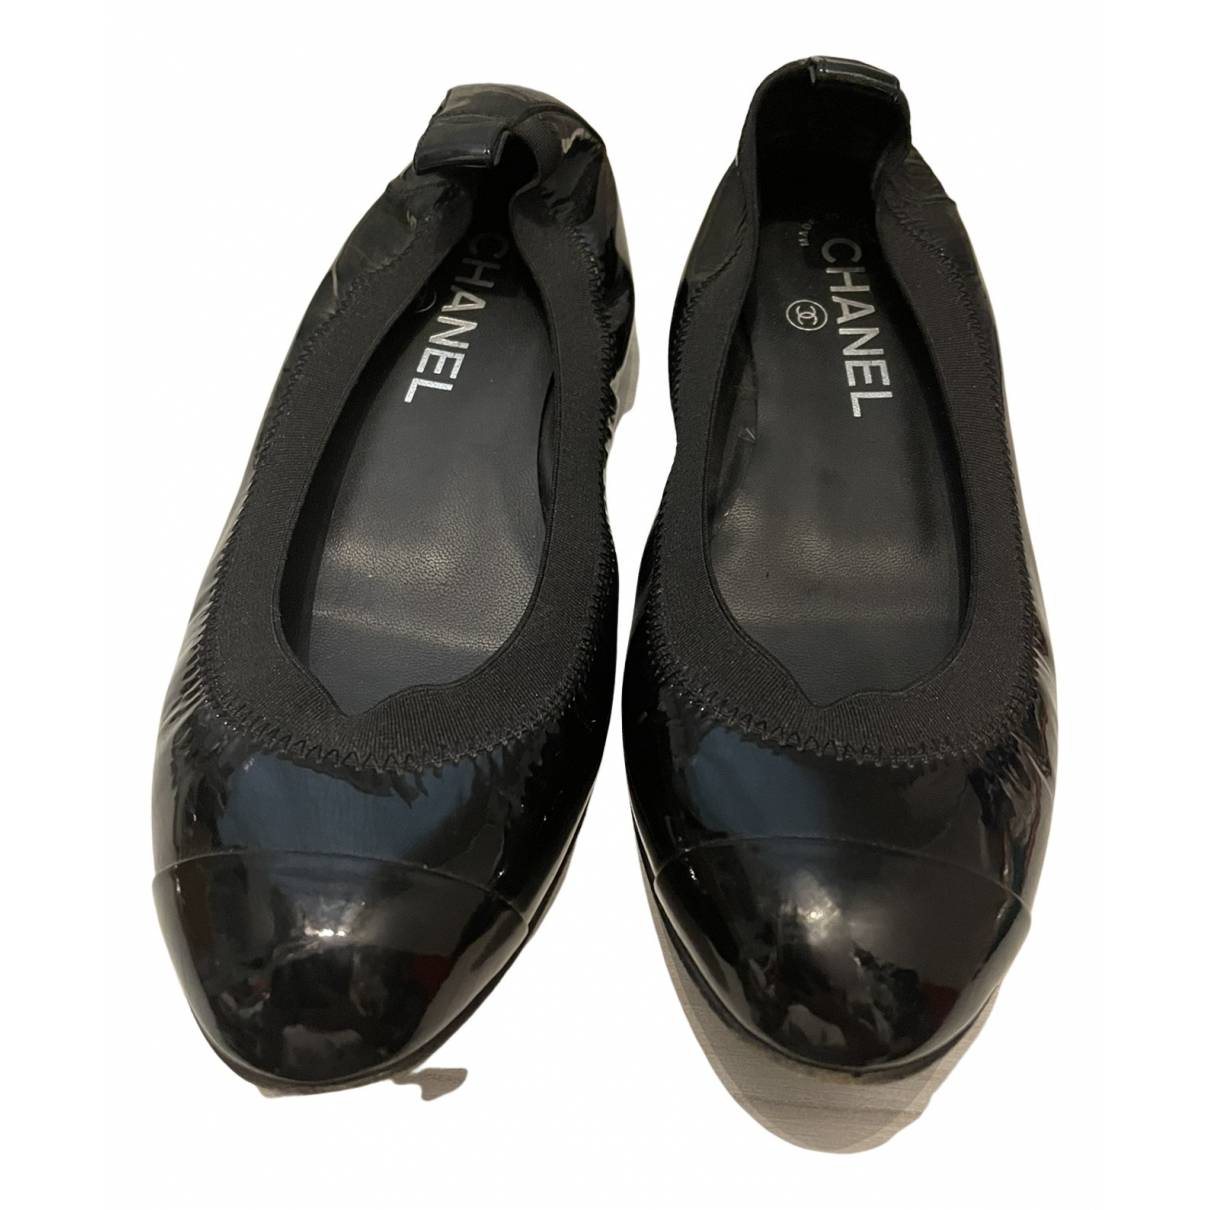 Patent leather ballet flats Chanel Black size 36 EU in Patent leather -  22125657